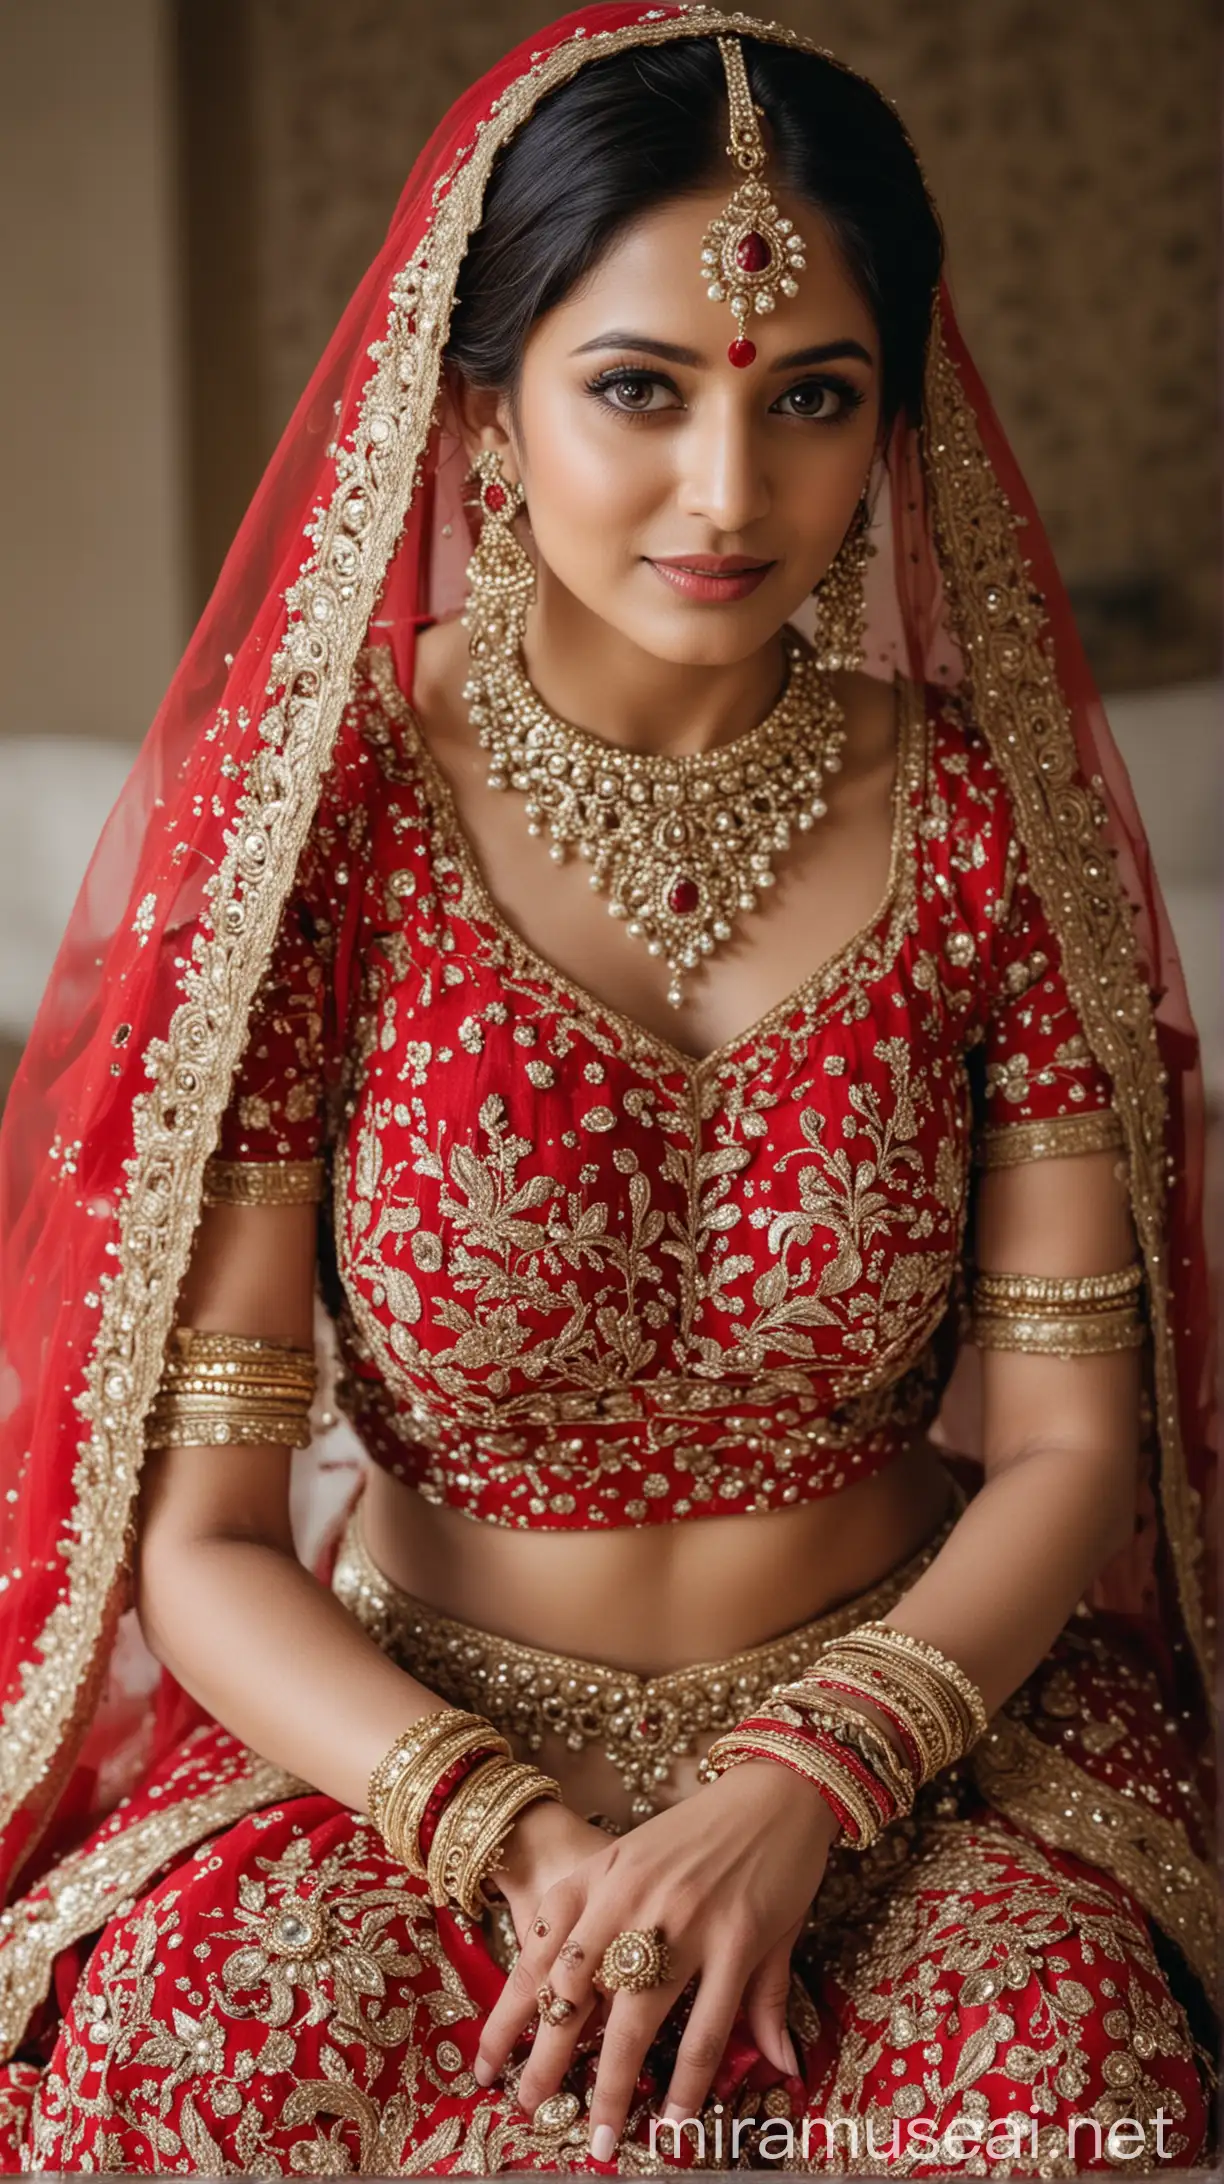 Indian bride in red lehenga and ornaments